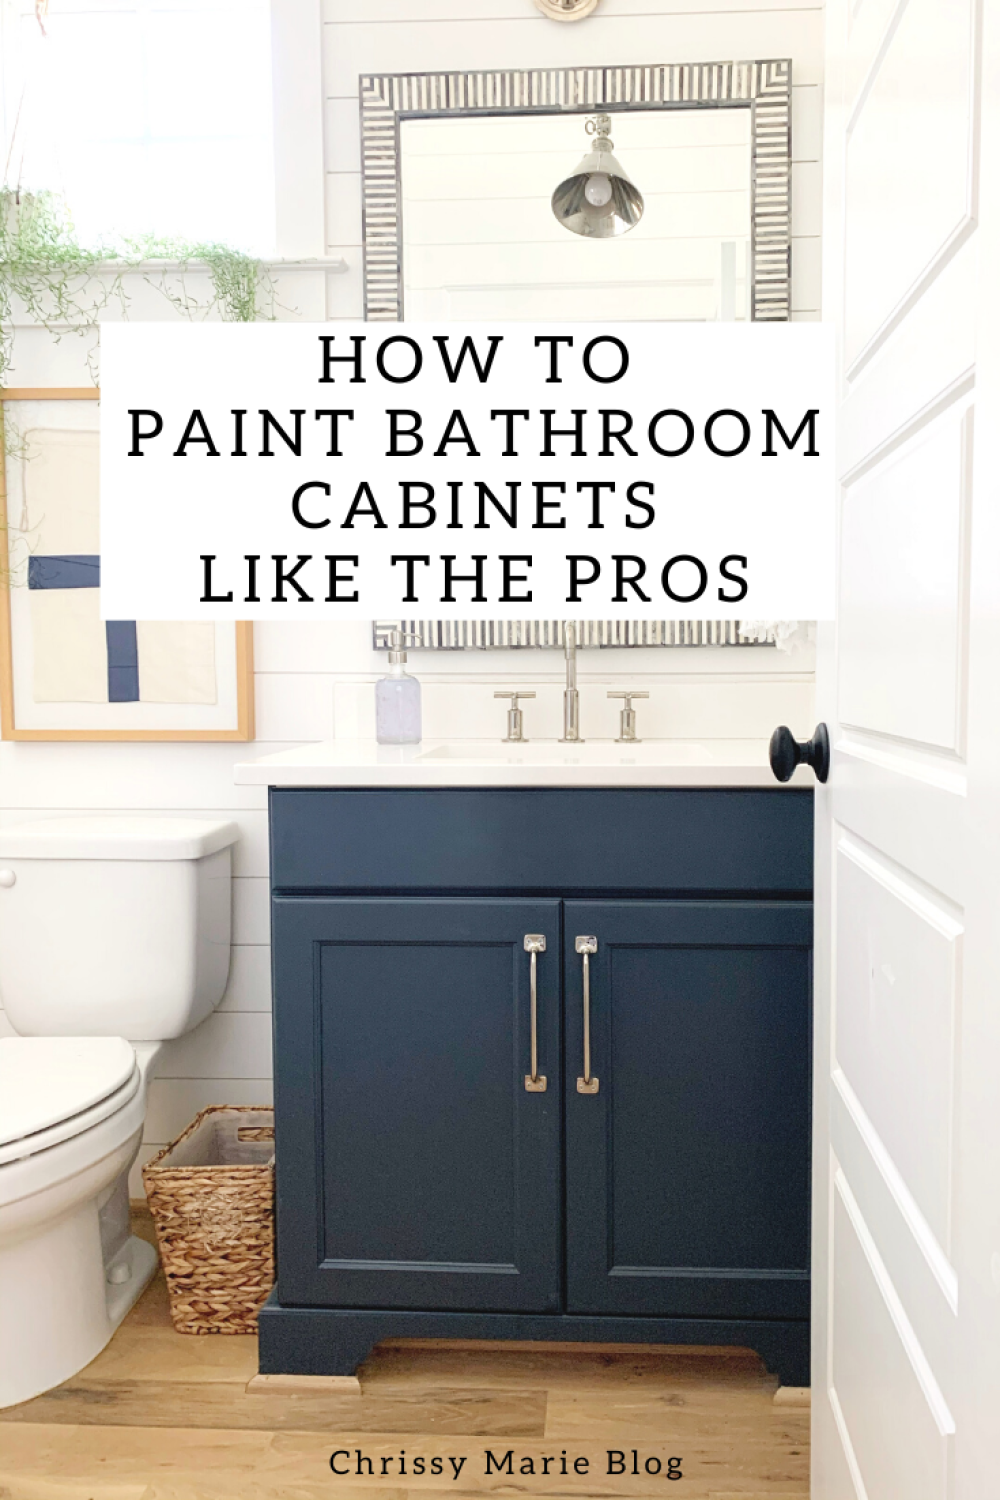 Painting Bathroom Cabinets: A Beginner